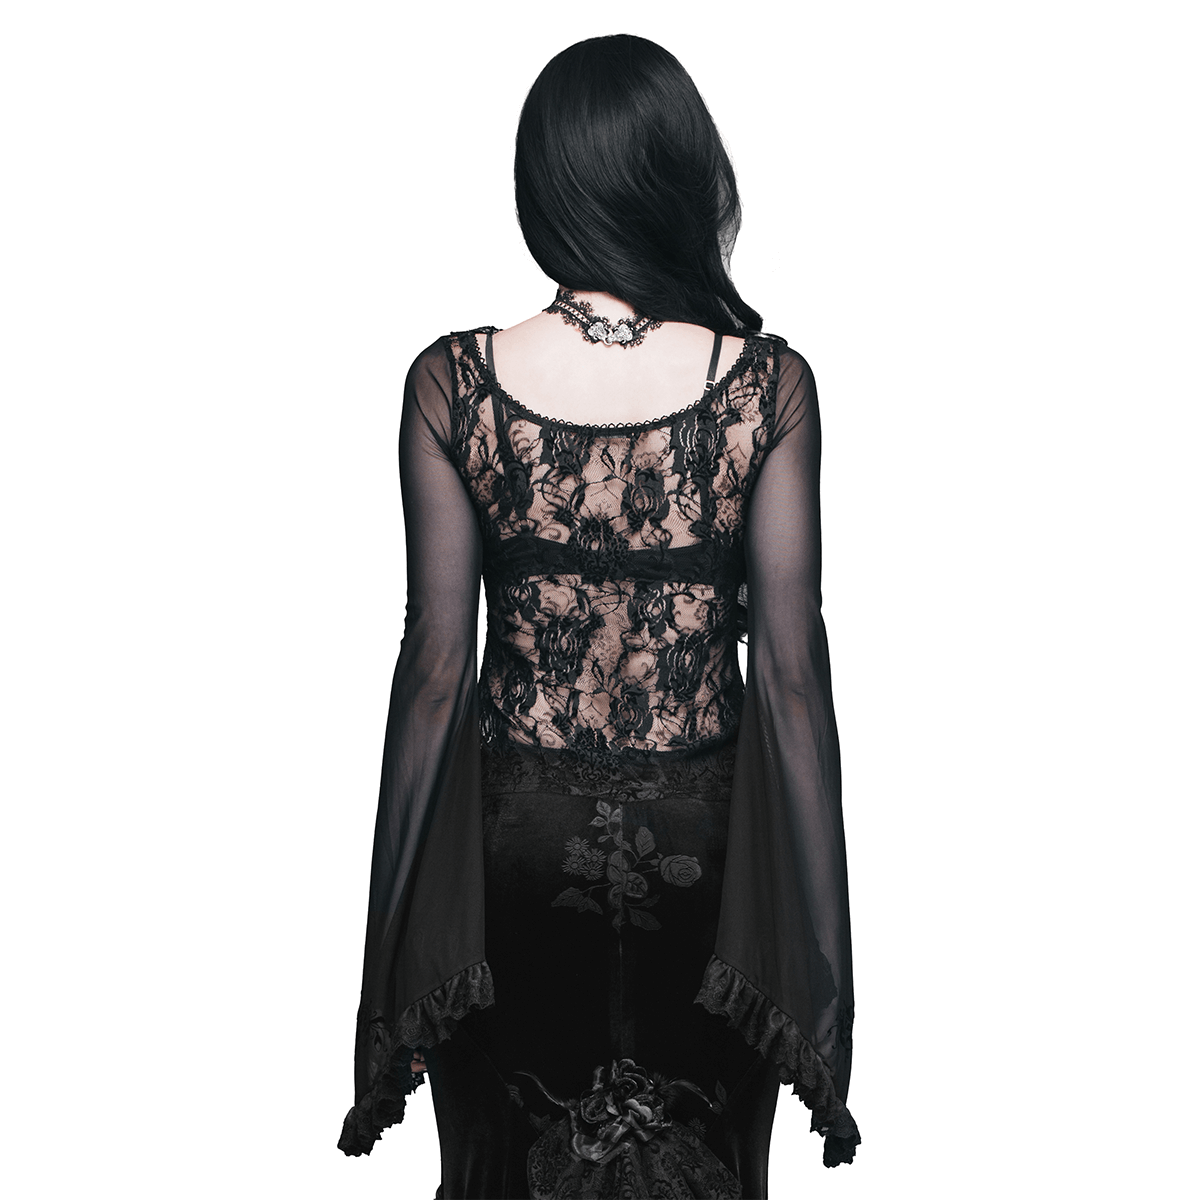 Women's Vintage Translucent Lace Top / Elegant Gothic Long Sleeves Top with Bells & Ruffles - HARD'N'HEAVY